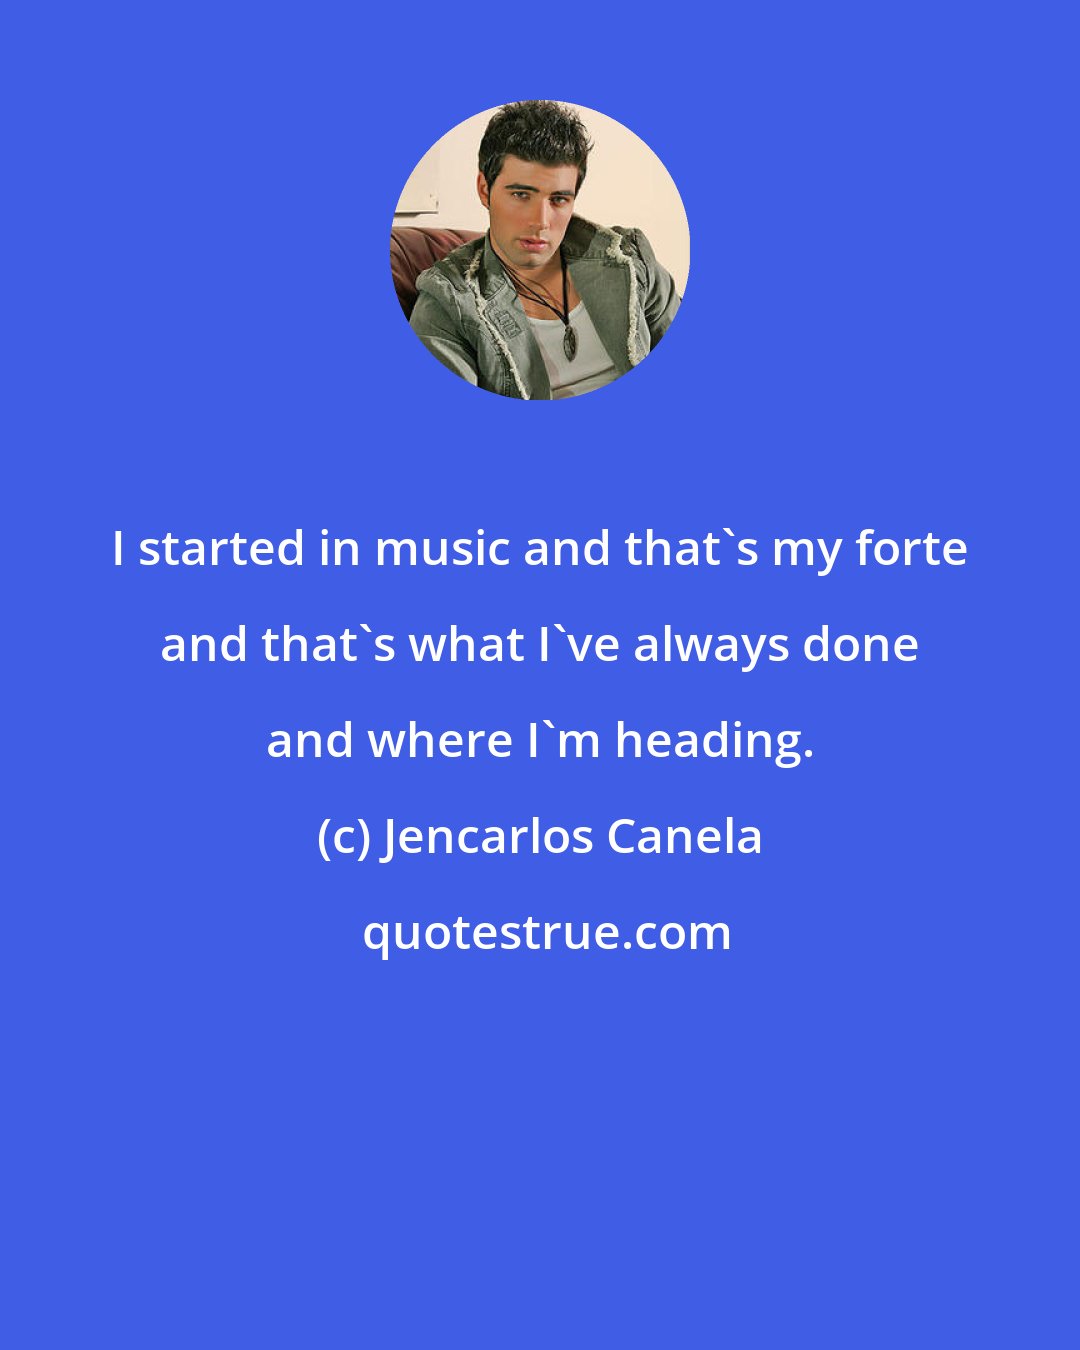 Jencarlos Canela: I started in music and that's my forte and that's what I've always done and where I'm heading.